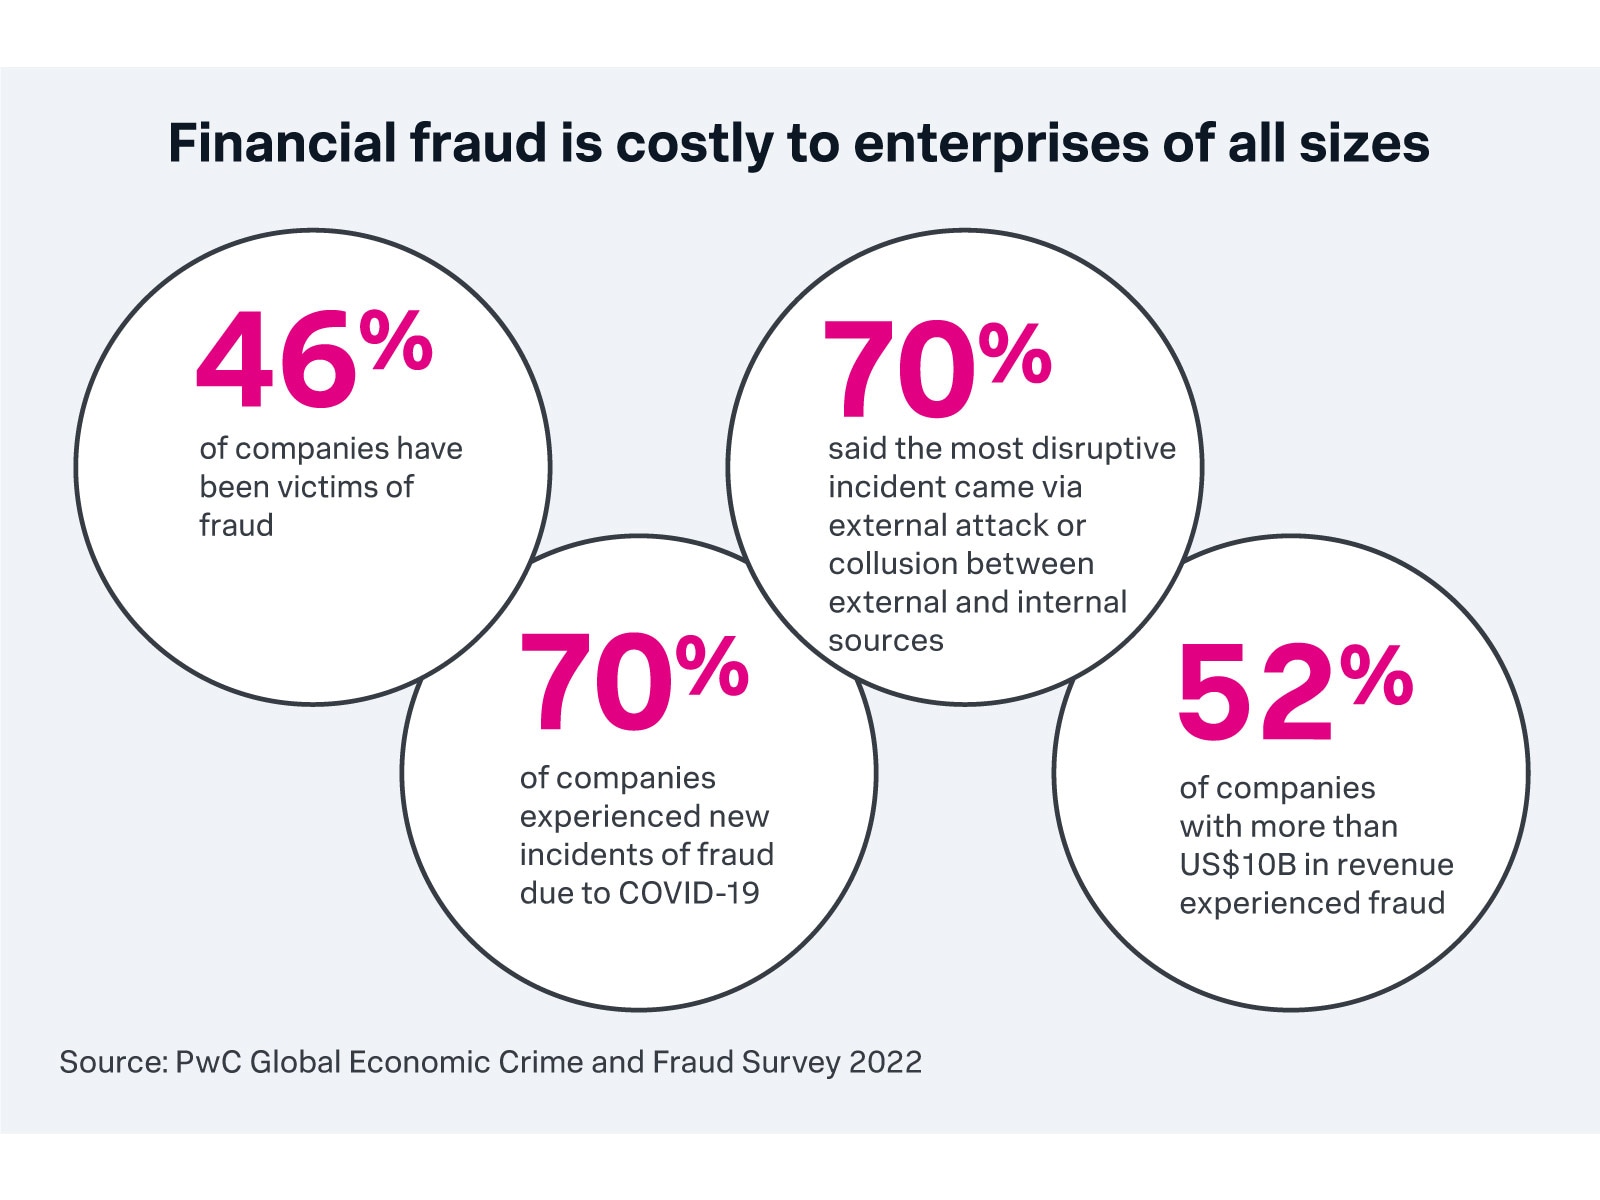 Four circles are arranged horizontally under the words financial fraud is costly to enterprises of all sizes. They each contain a key data point about the cost of fraud and are as follows: 46 percent of companies have been victims of fraud, 70 percent of companies experienced new incidents of fraud due to COVID-19, 70 percent said the most disruptive incident came via external attack or collusion between external and internal sources, and 52 percent of companies with more than 10 billion US dollars in revenue experienced fraud.